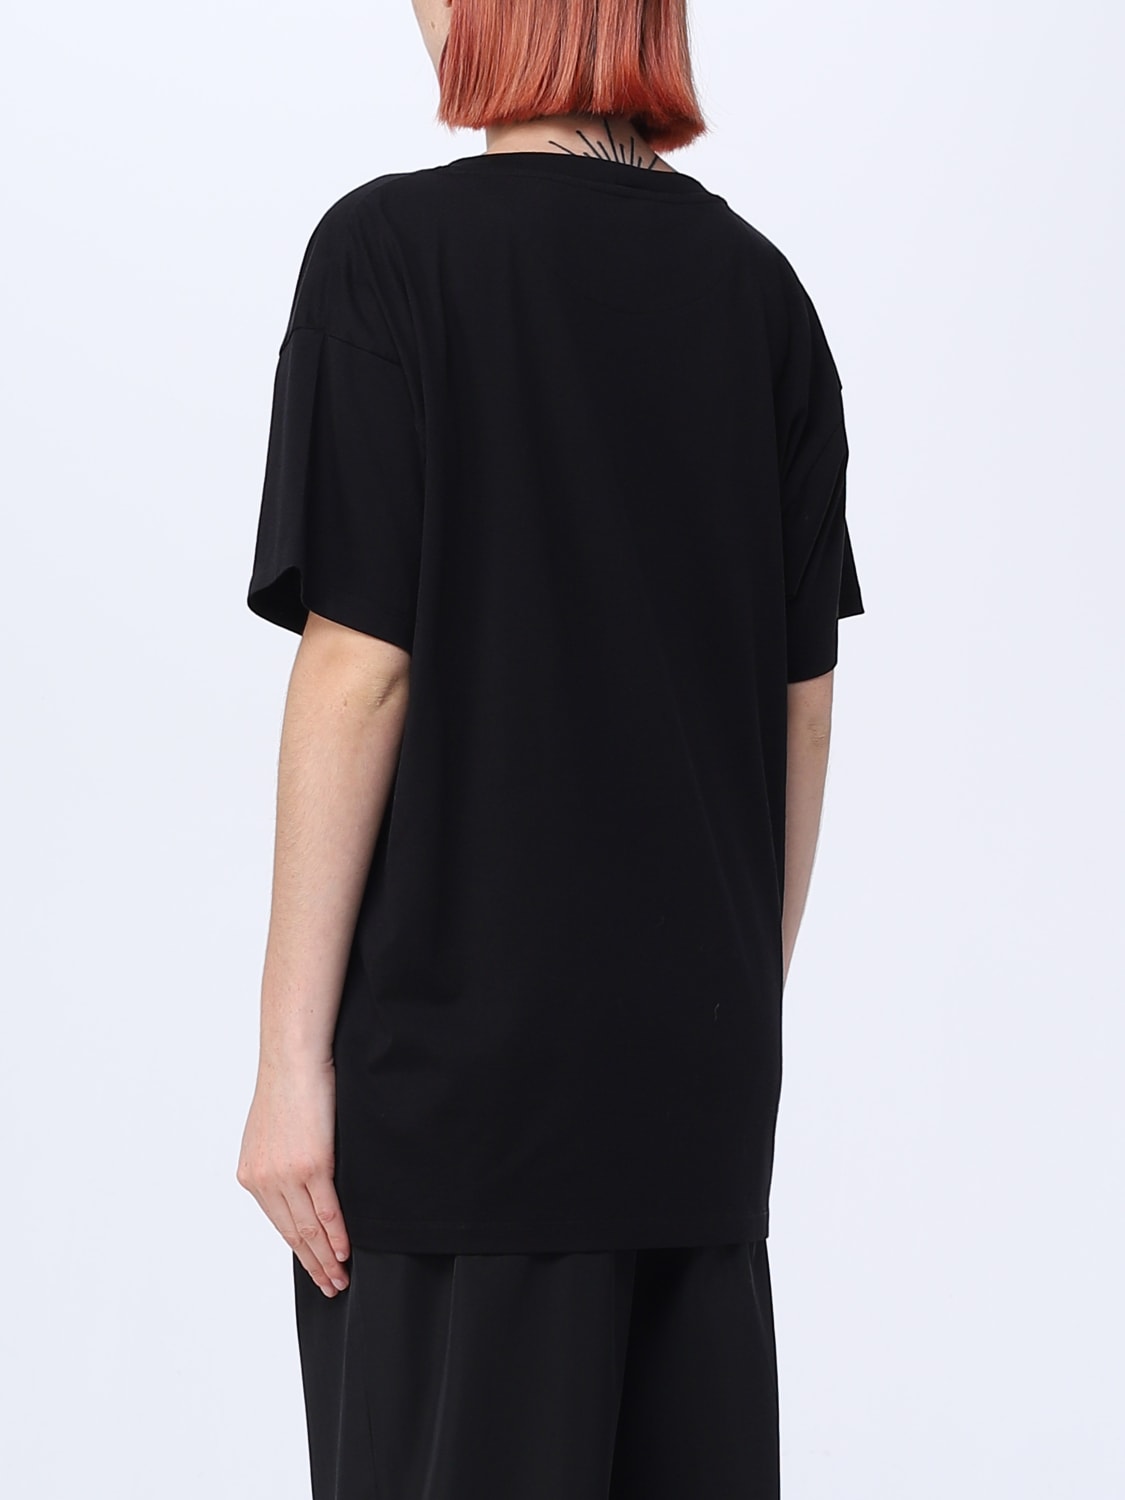 BALLY: t-shirt for woman - Black | Bally t-shirt MJE03ECO018 online at ...